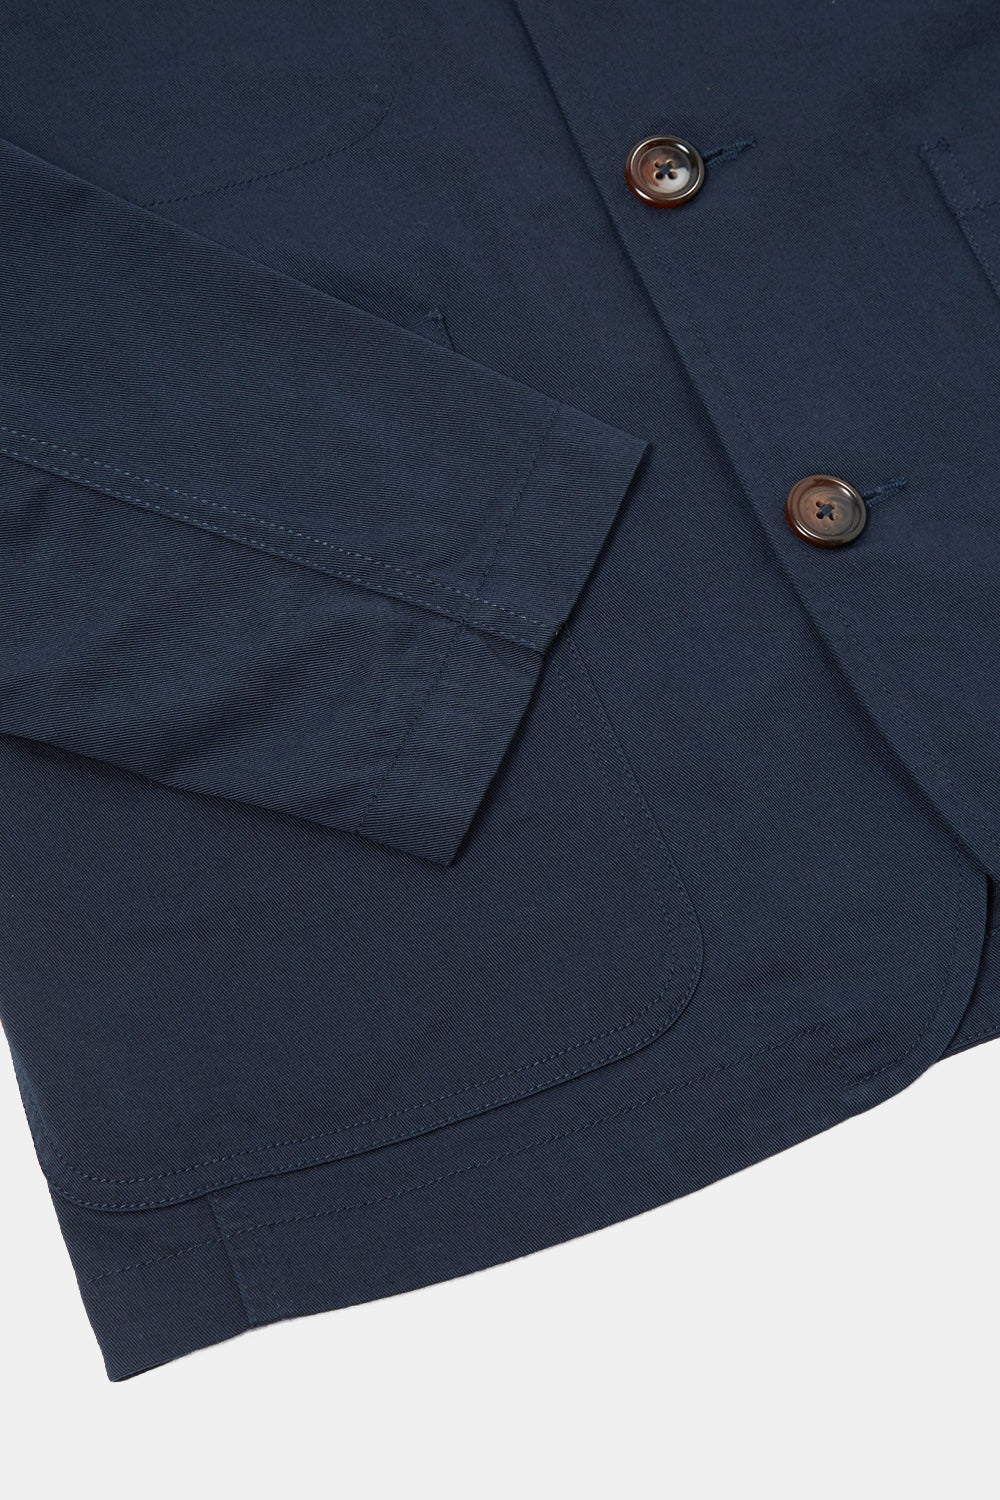 Universal Works Bakers Twill Jacket (Navy)
